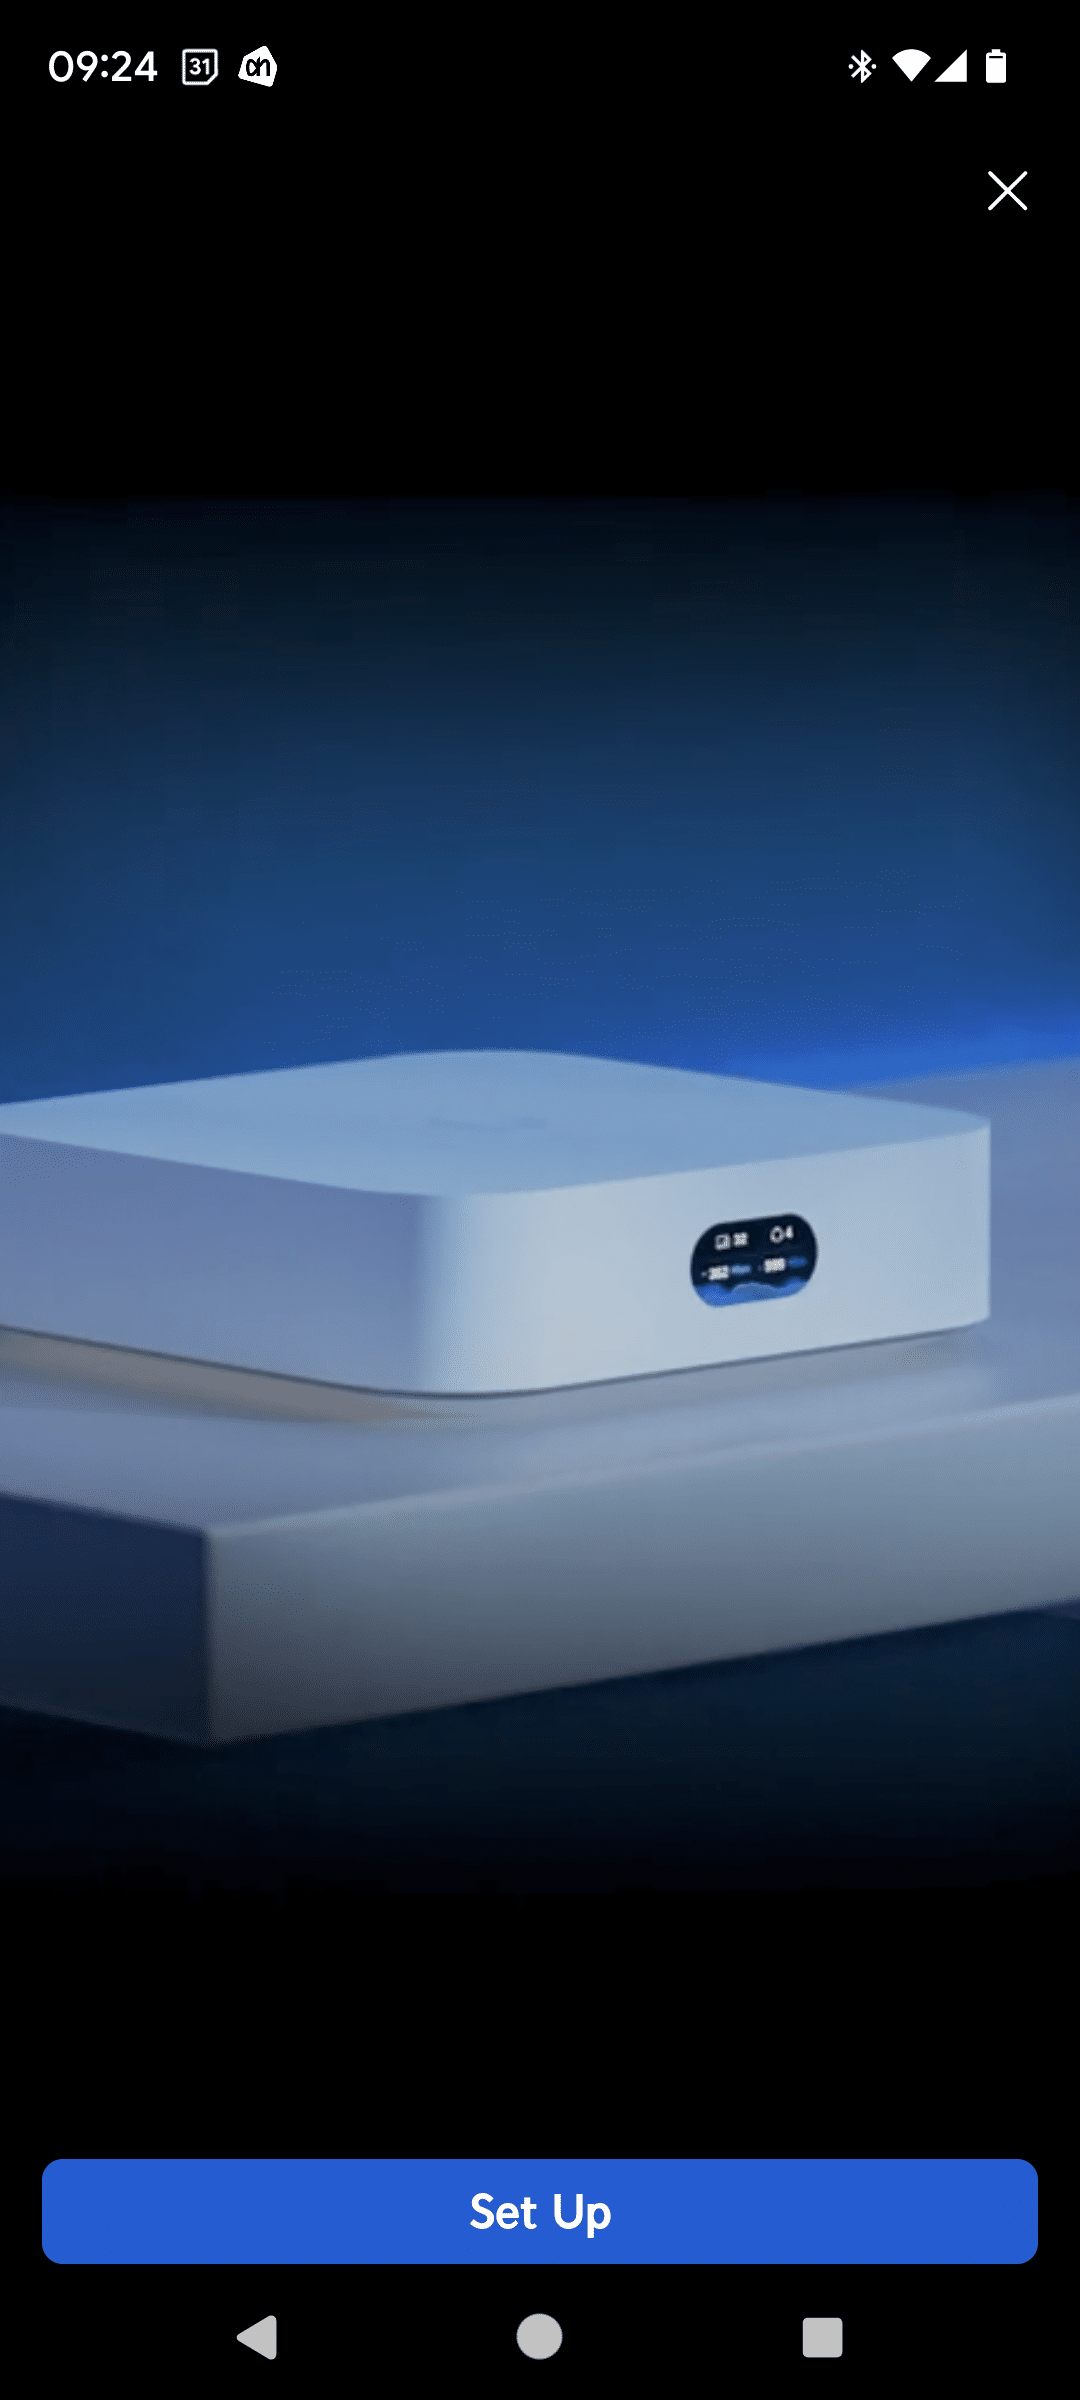 New Hardware Release: UniFi Express